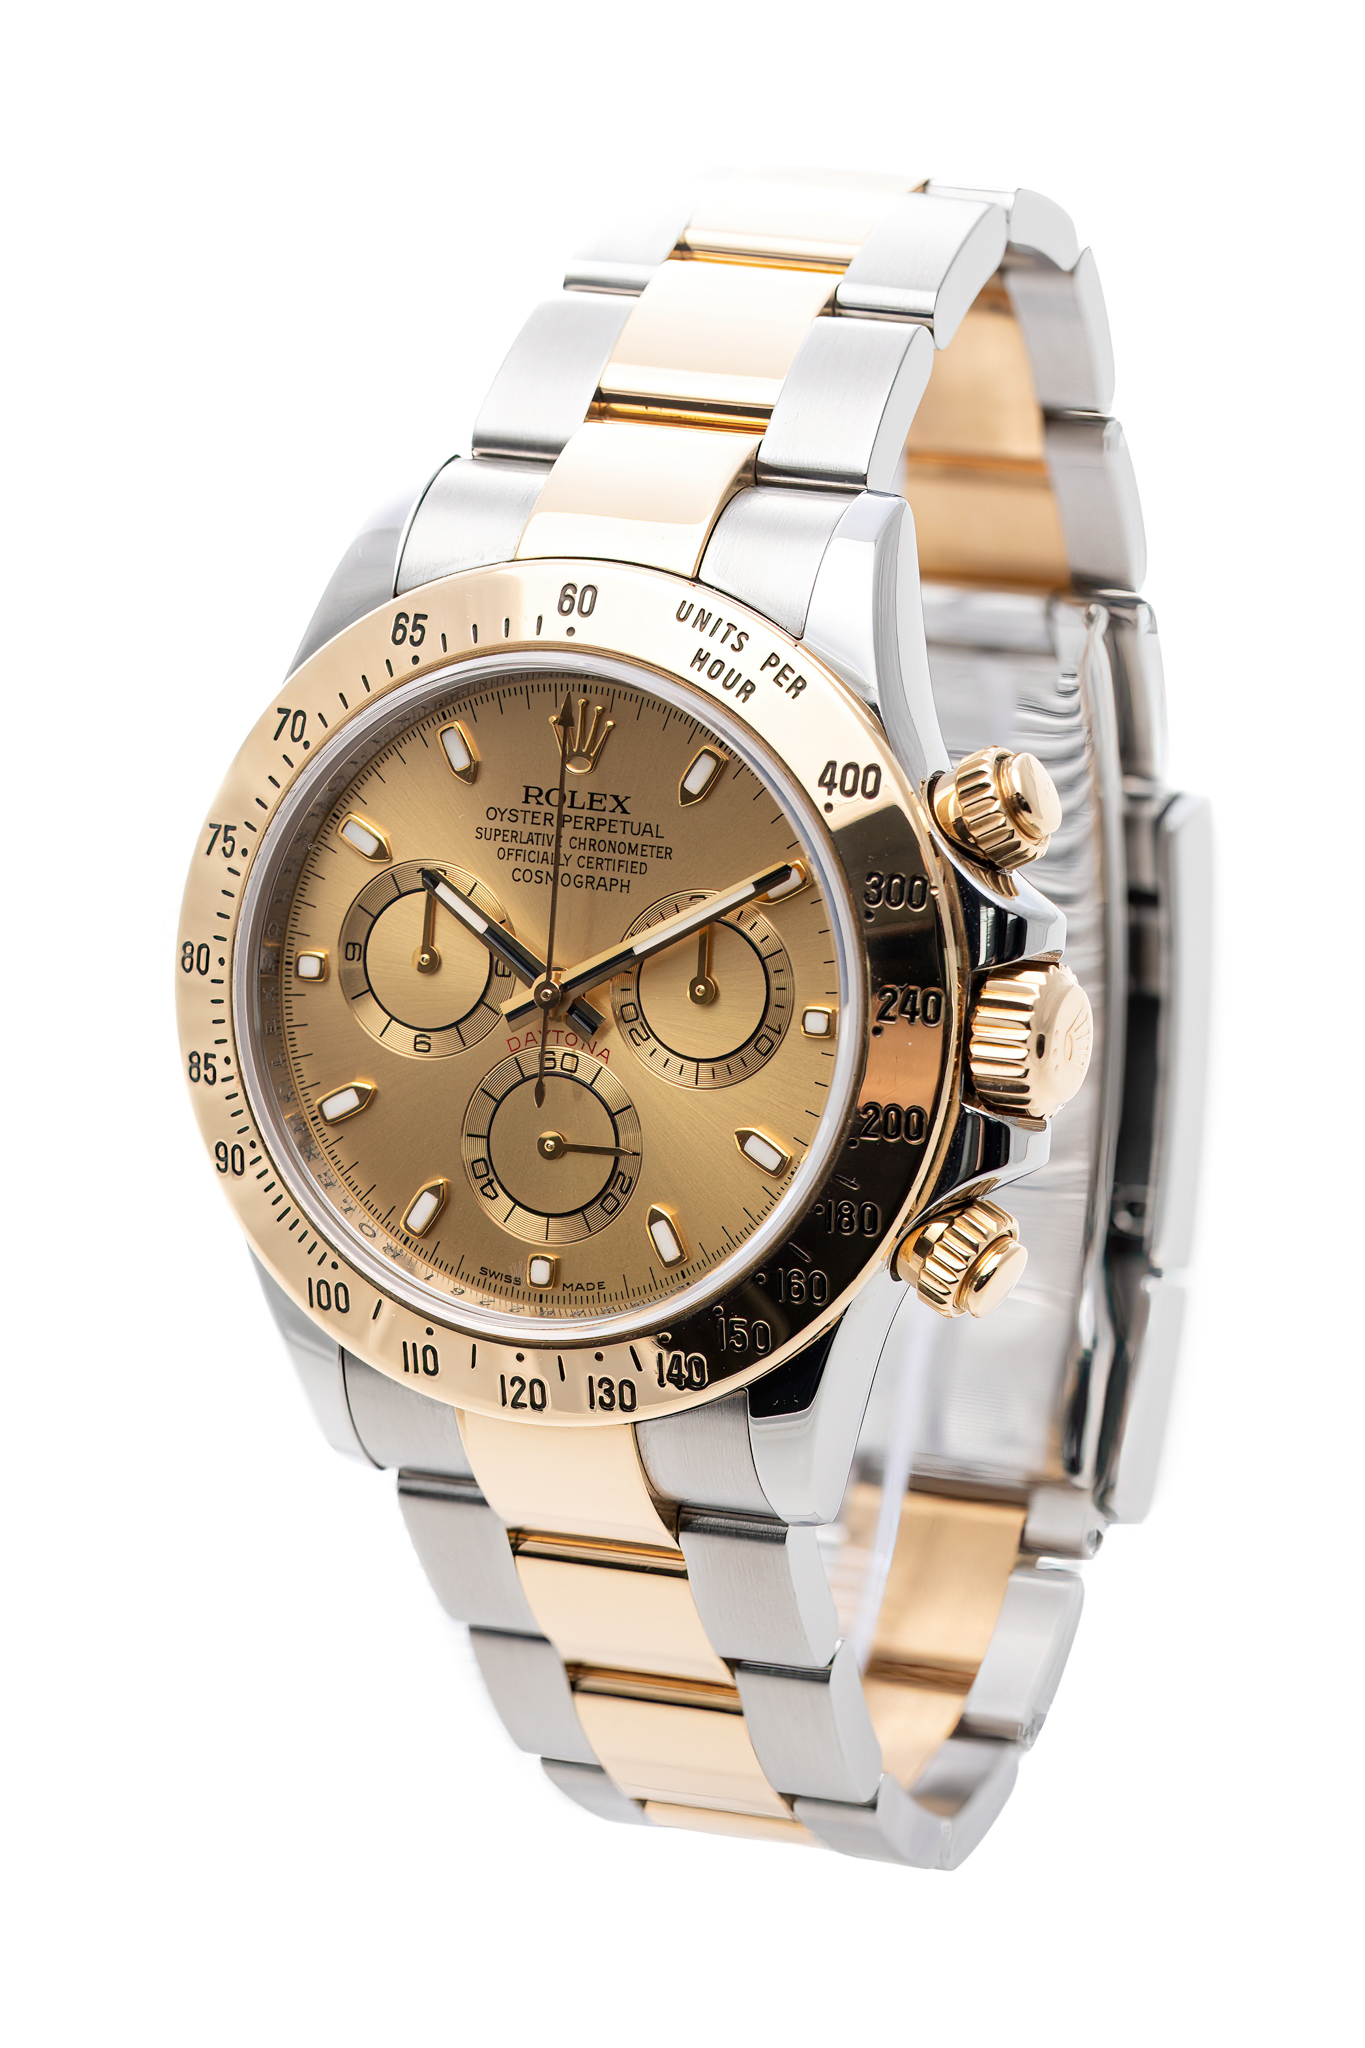 ROLEX DAYTONA COSMOGRAPH 40MM TWO TONE CHAMPAGNE DIAL BOX&PAPERS REF: 116523